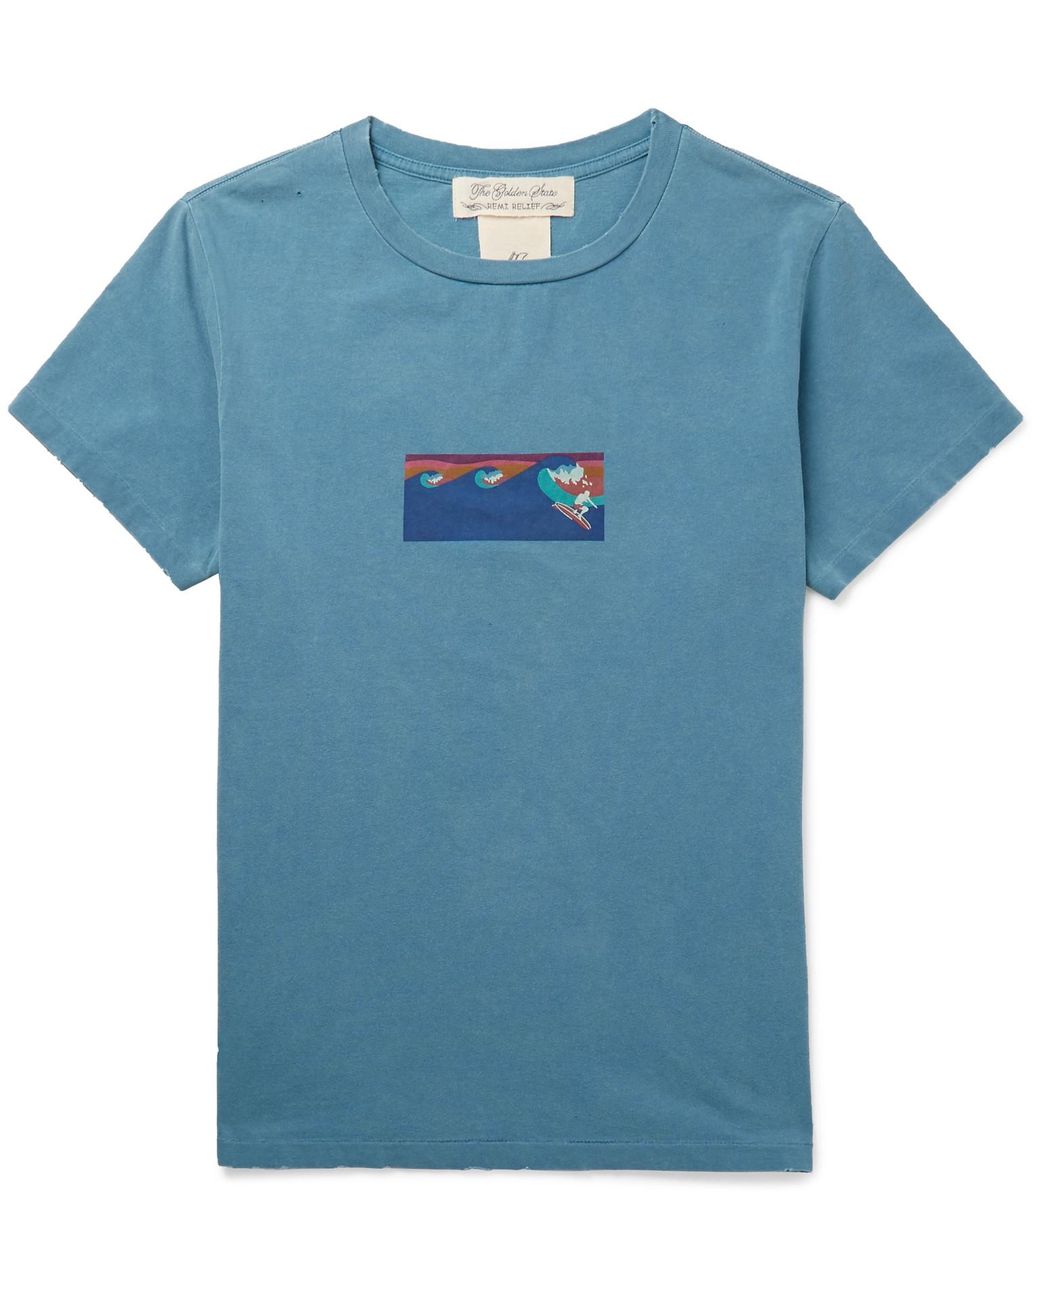 Remi Relief Printed Cotton-jersey T-shirt in Blue for Men - Lyst